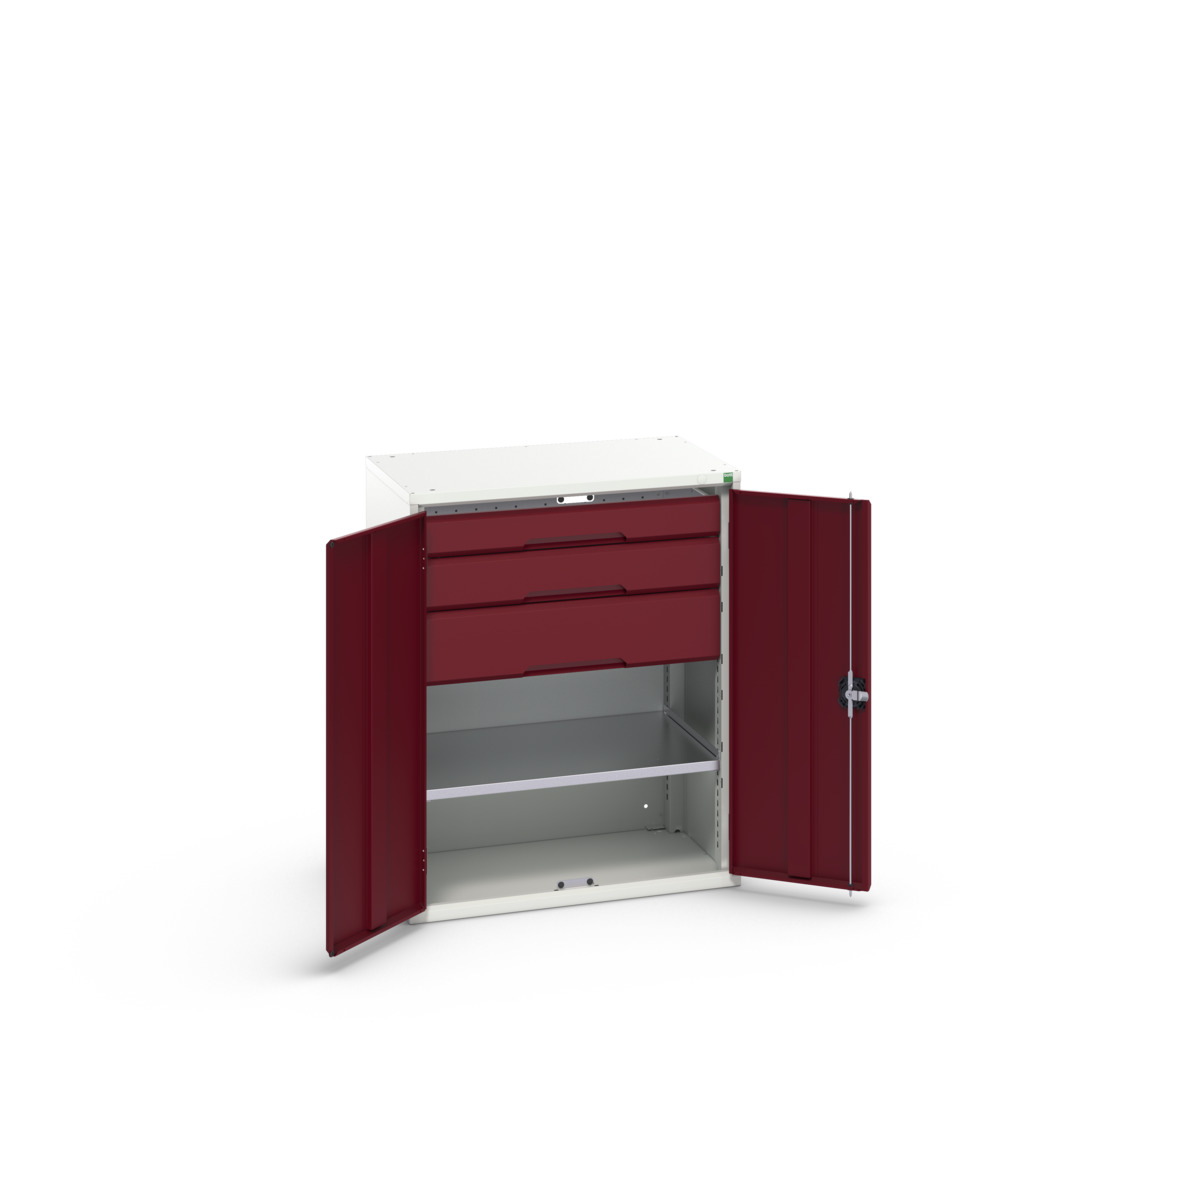 16926454.24 - verso kitted cupboard